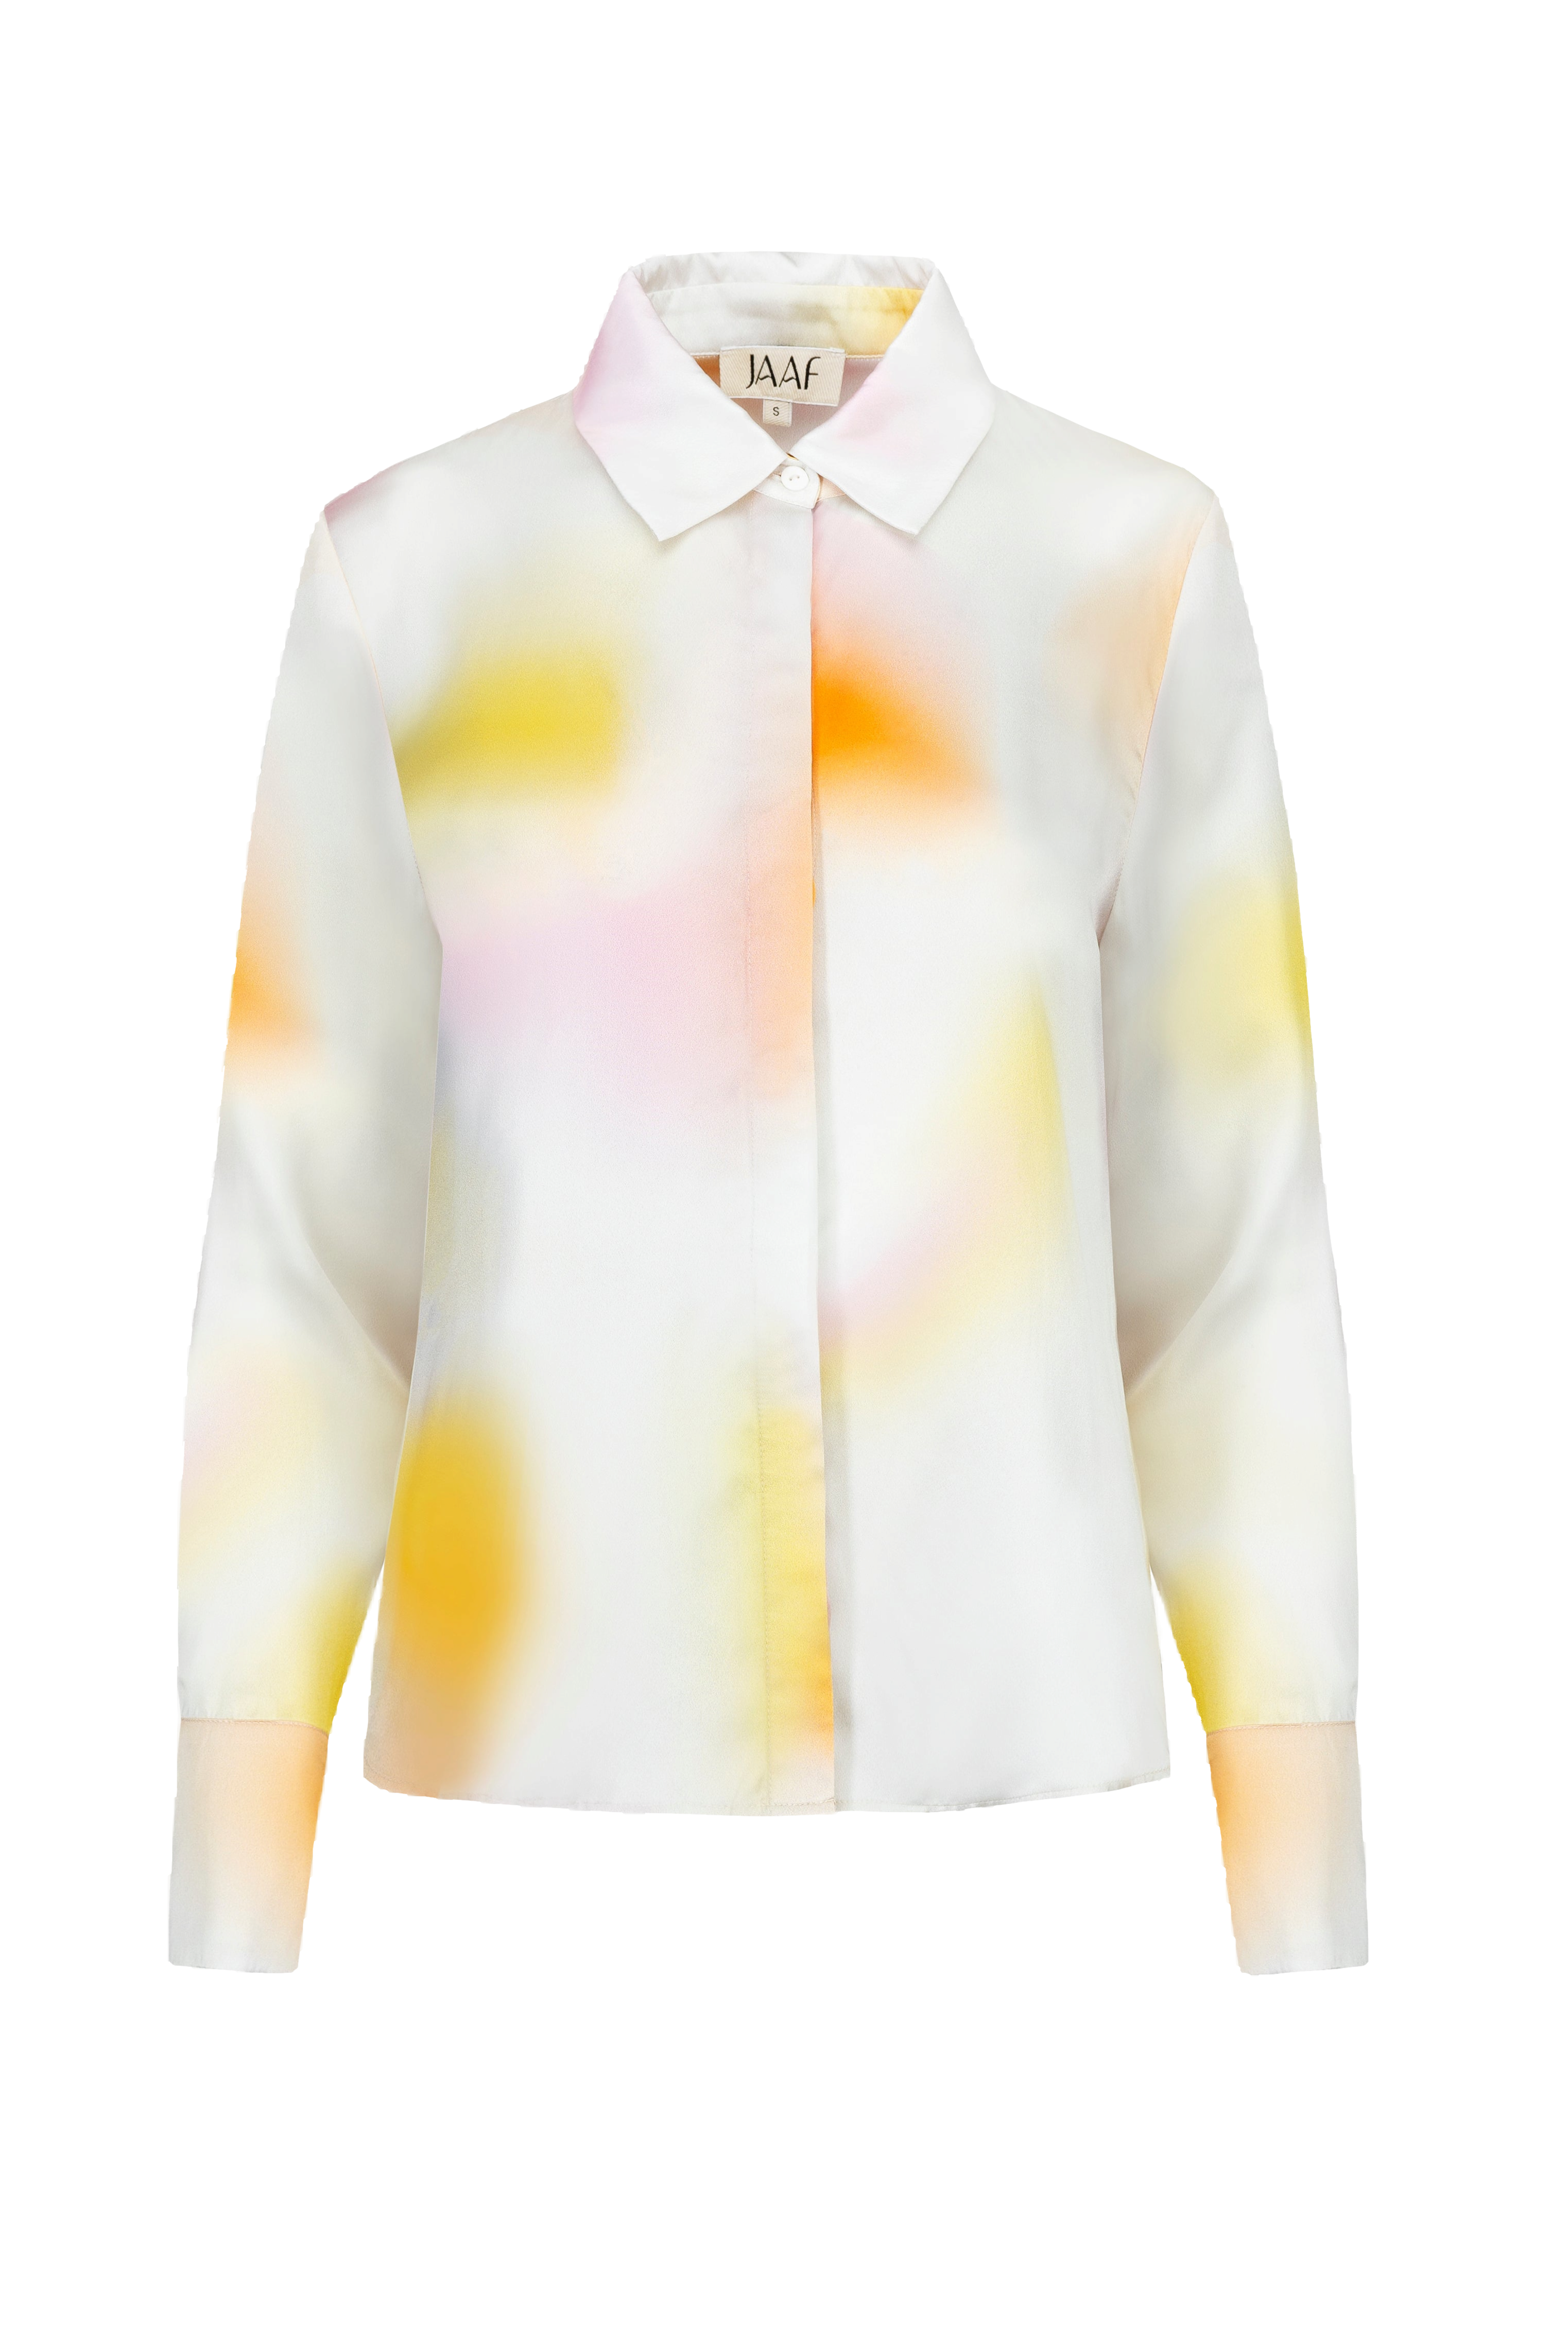 Jaaf Relaxed Shirt In Aura Light Print In Multi Colour